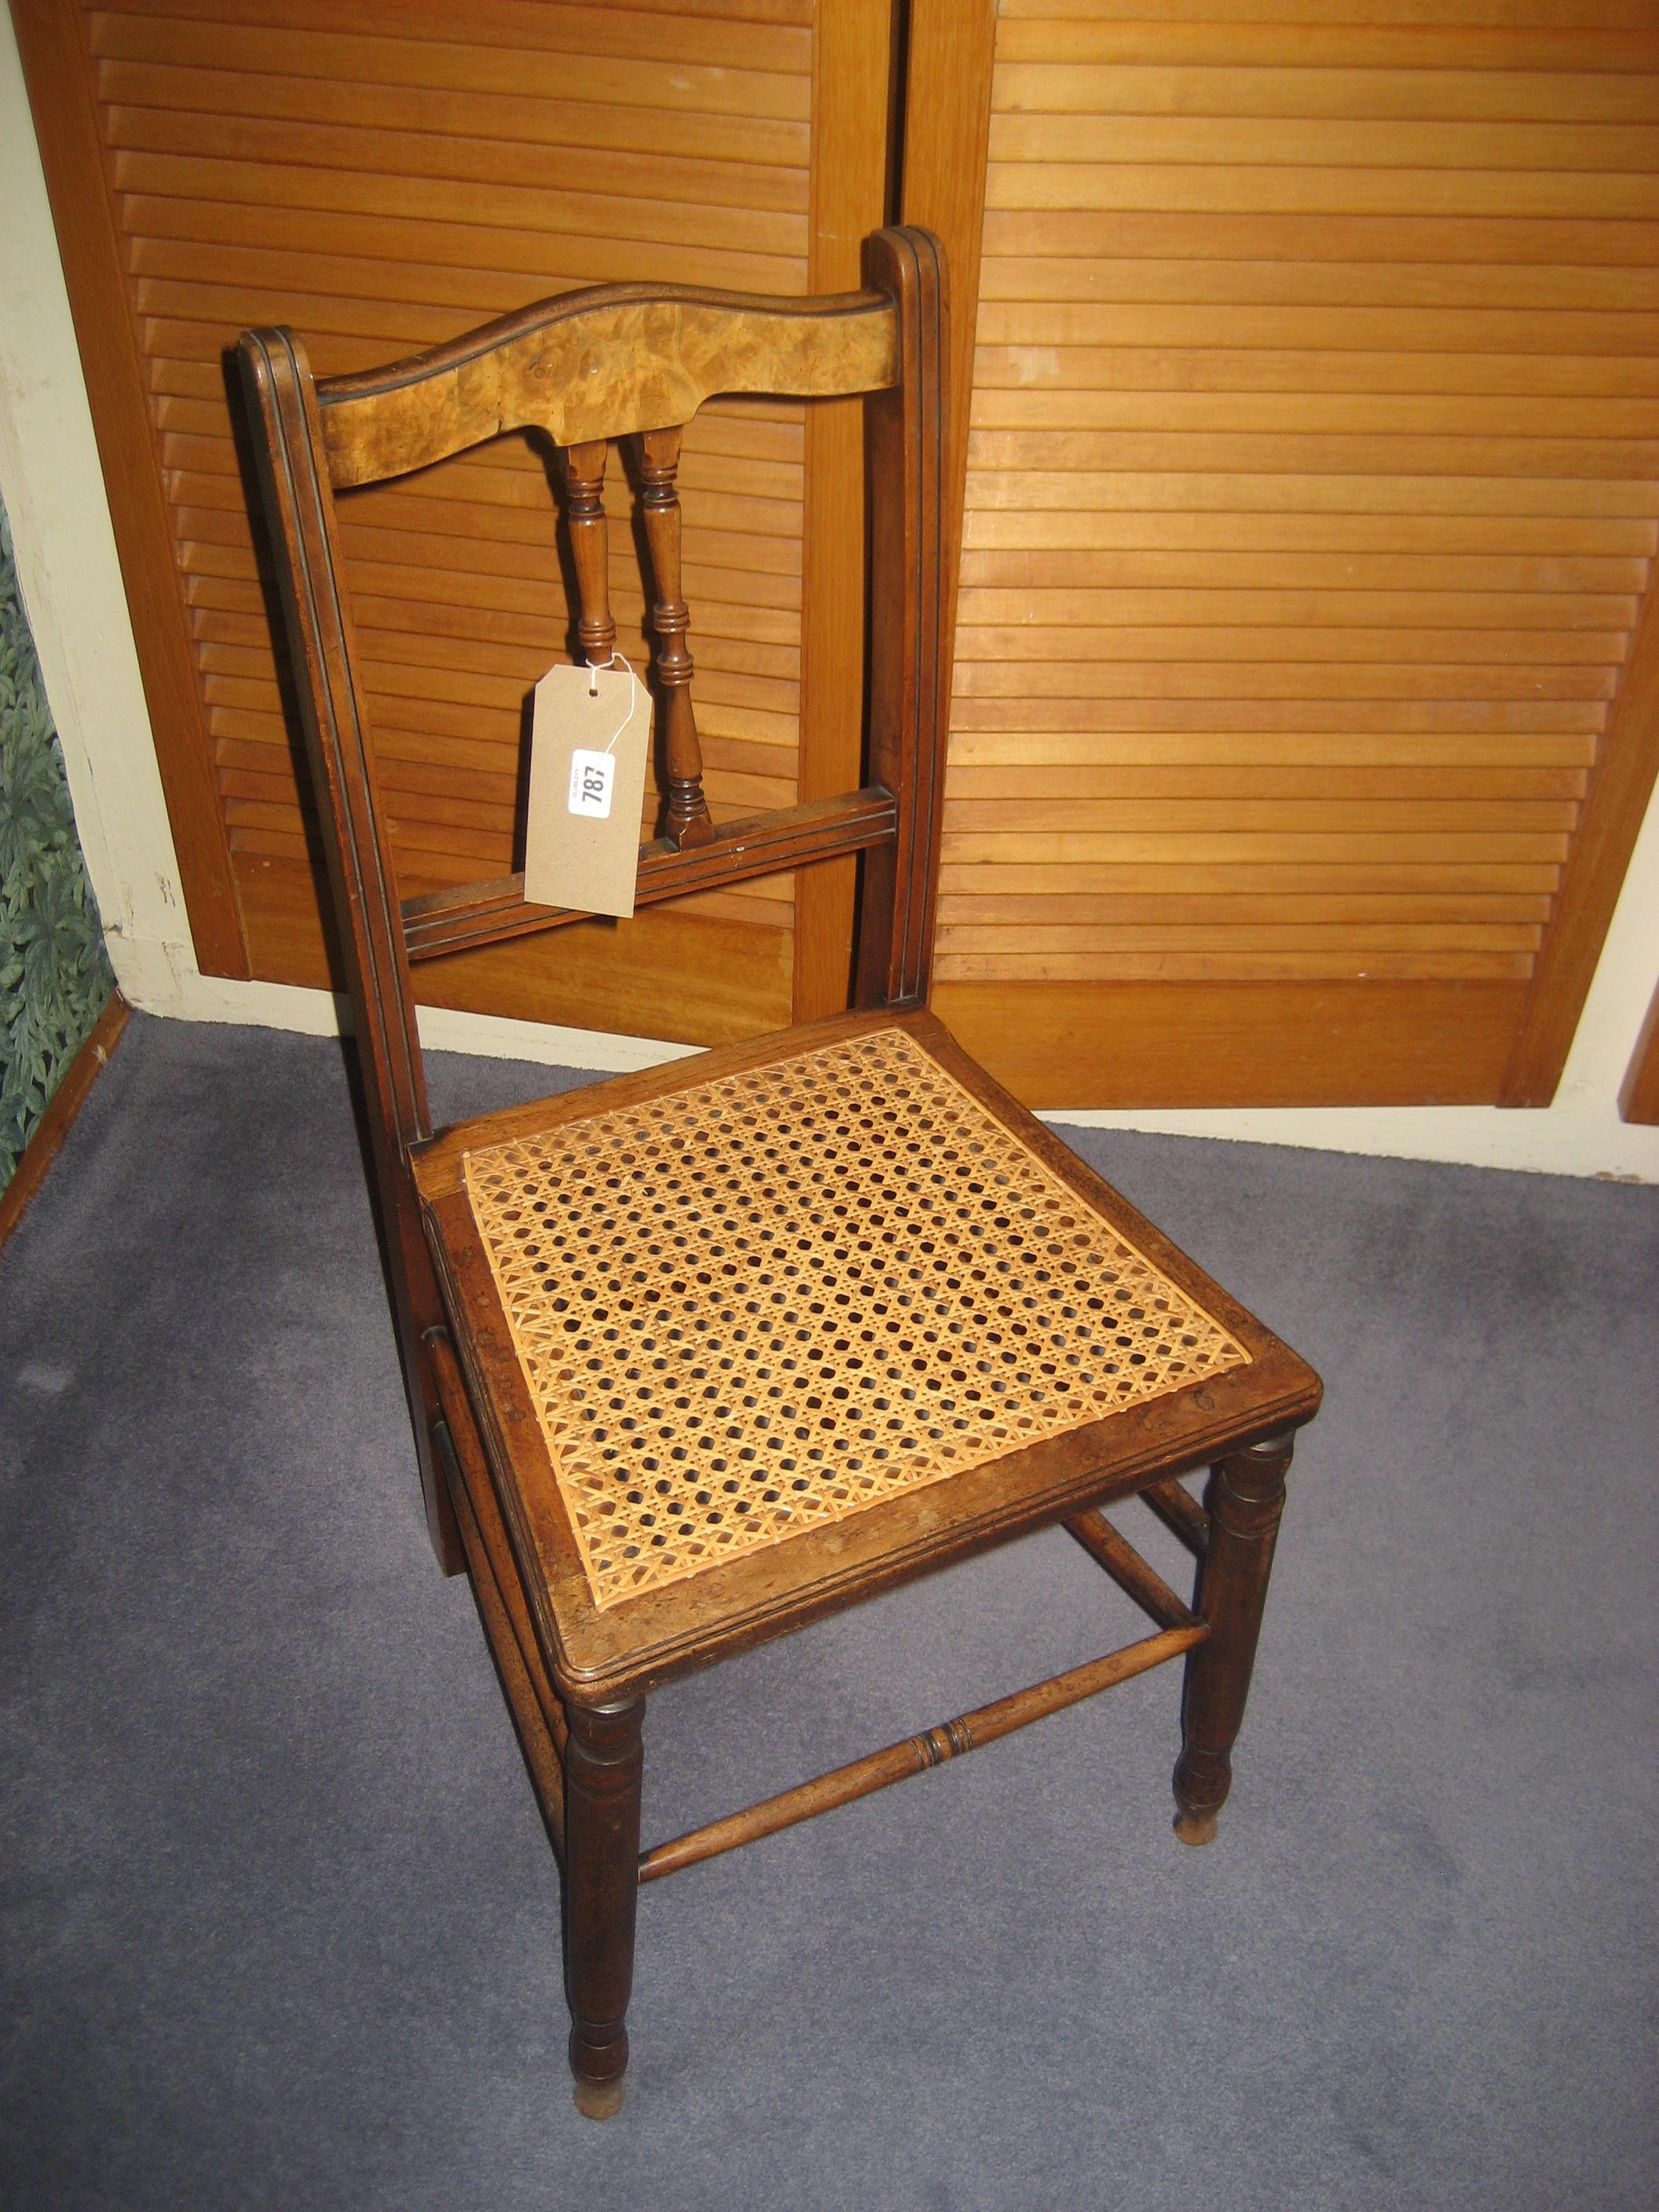 An Edwardian cane seat bedroom chair.